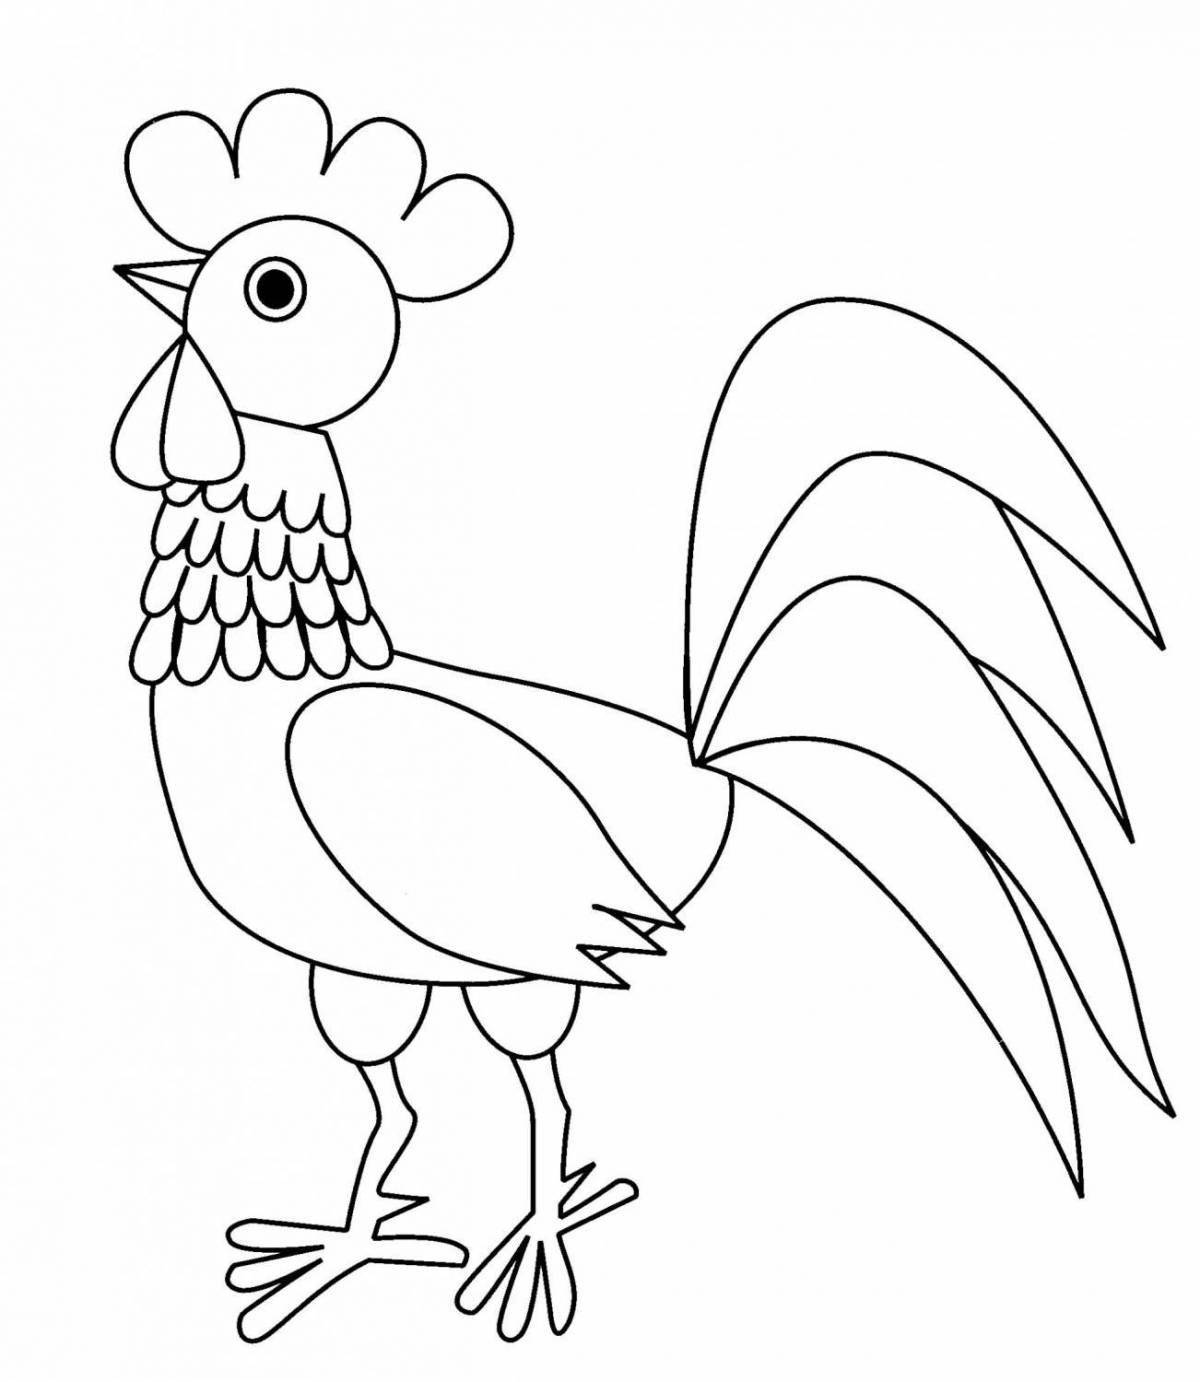 Adorable rooster coloring book for 3-4 year olds